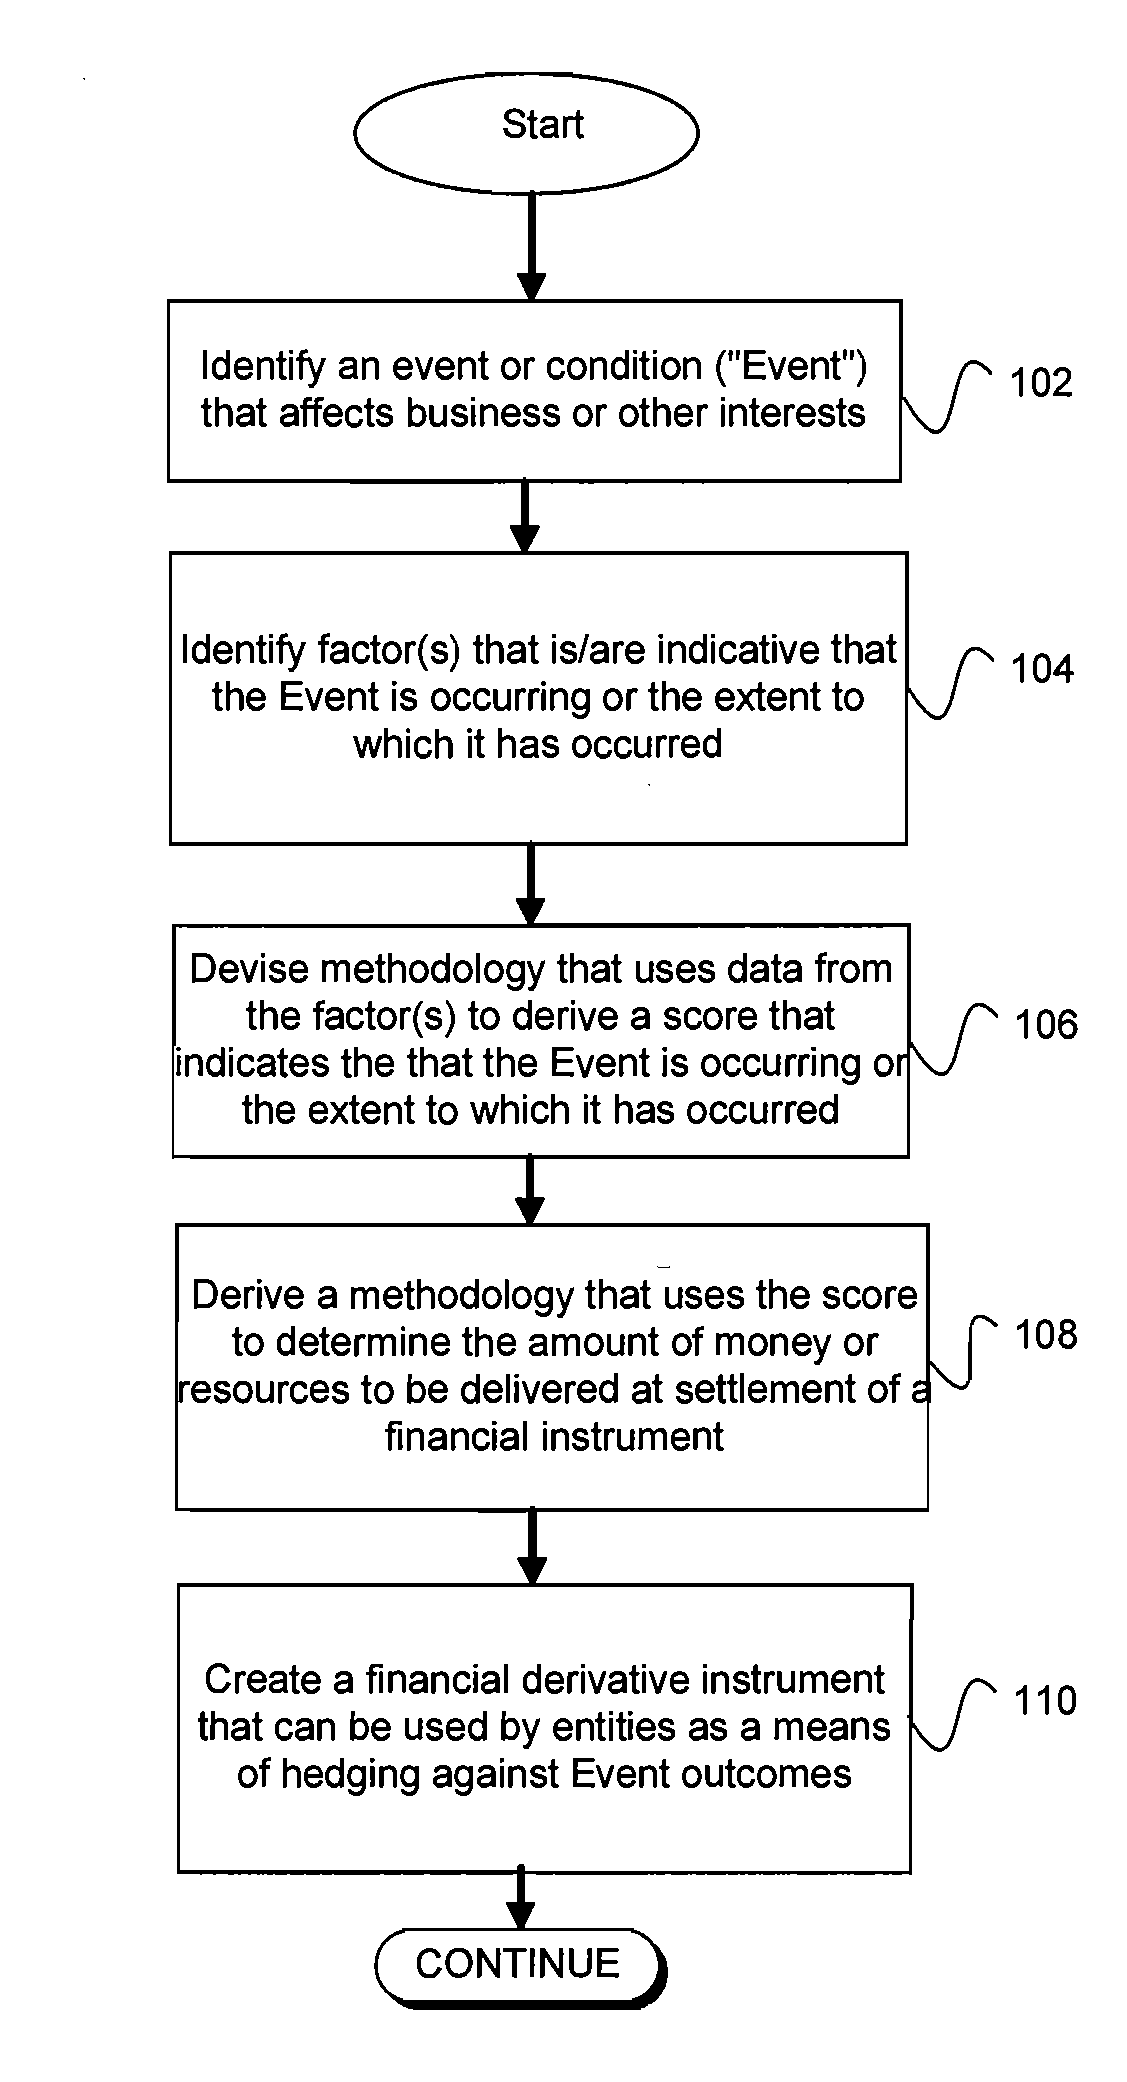 System, method and media for trading of event-linked derivative instruments